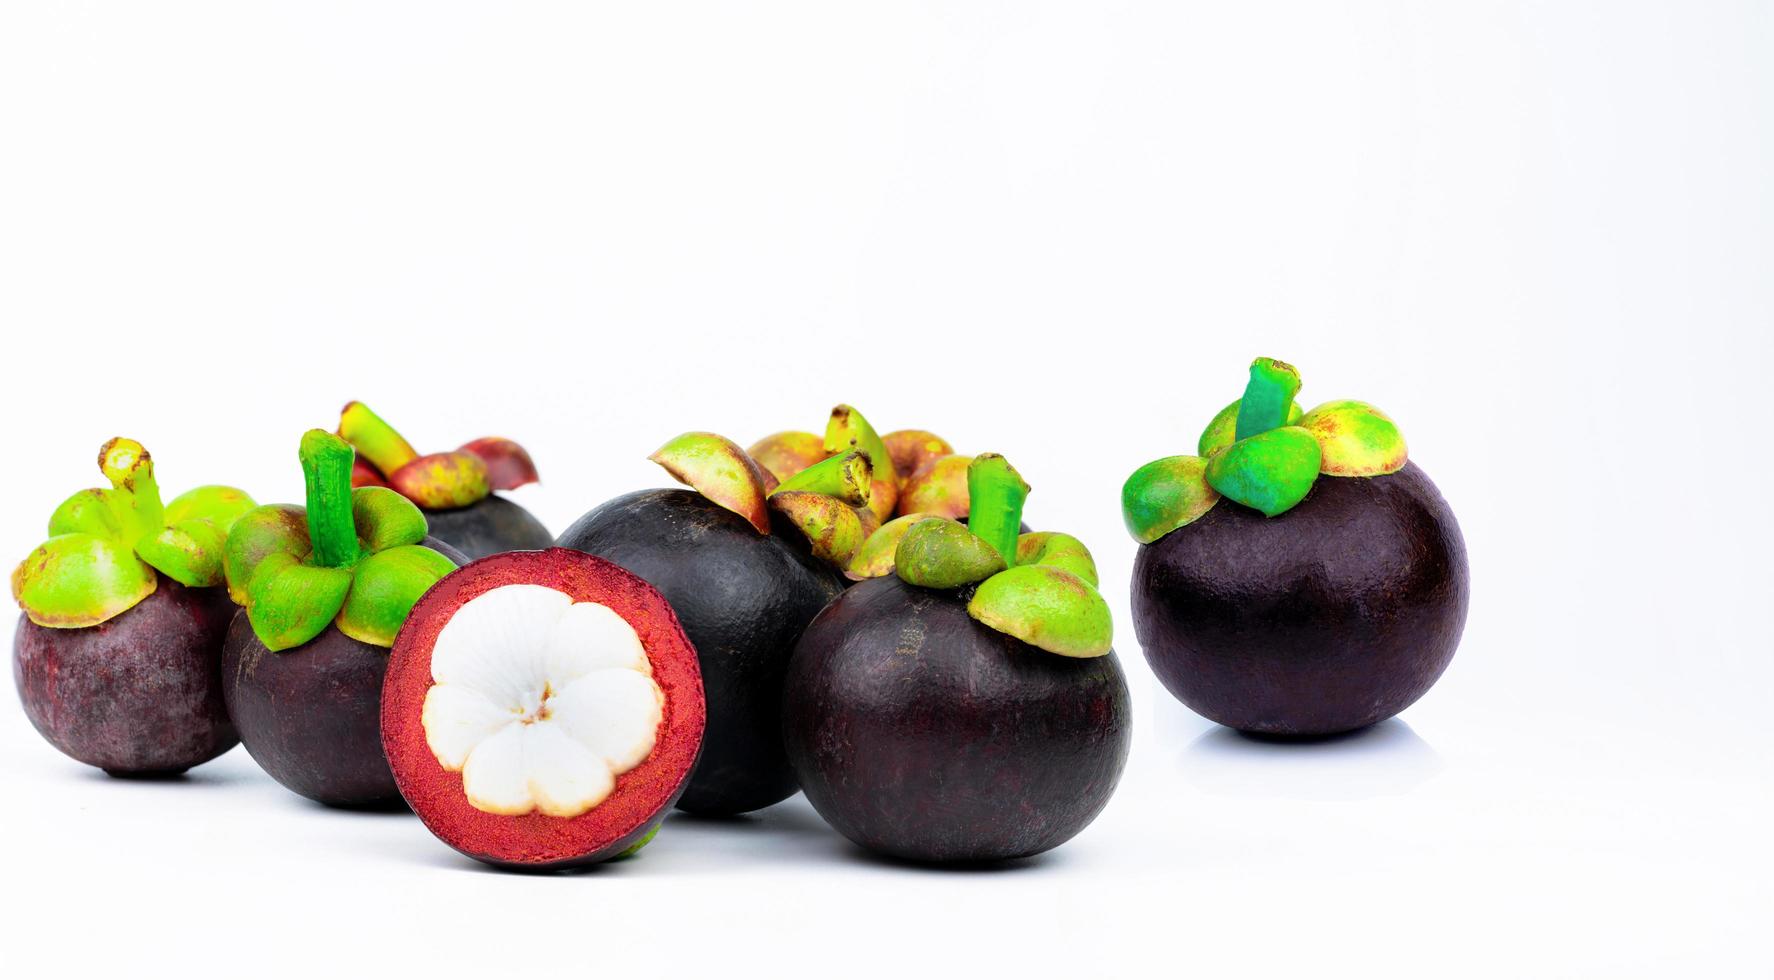 7 whole purple mangosteen and another cross section isolated on white background. Tropical fruit from Thailand. The queen of fruits. Asia fresh fruit market. Natural source of tannin and xanthones photo